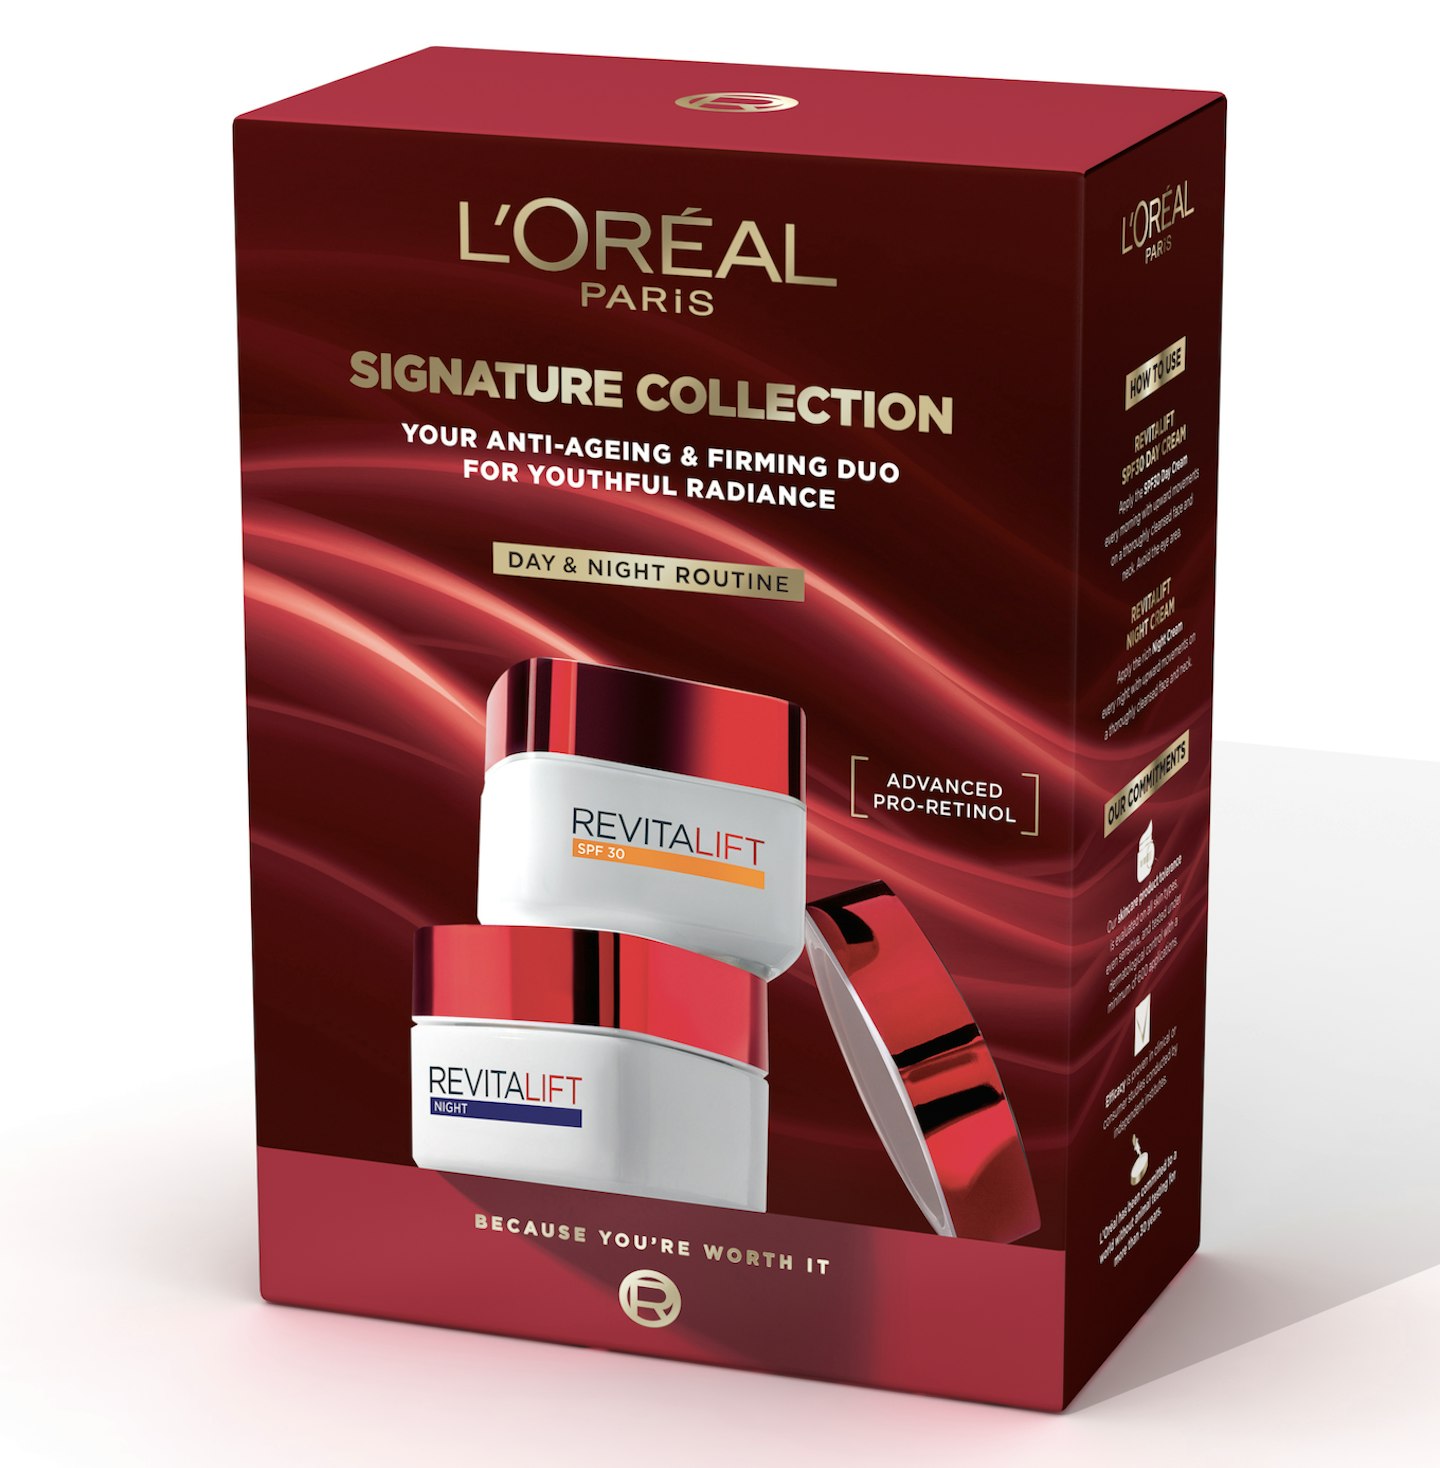 L'Oreal Paris Signature Collection Day and Night Routine